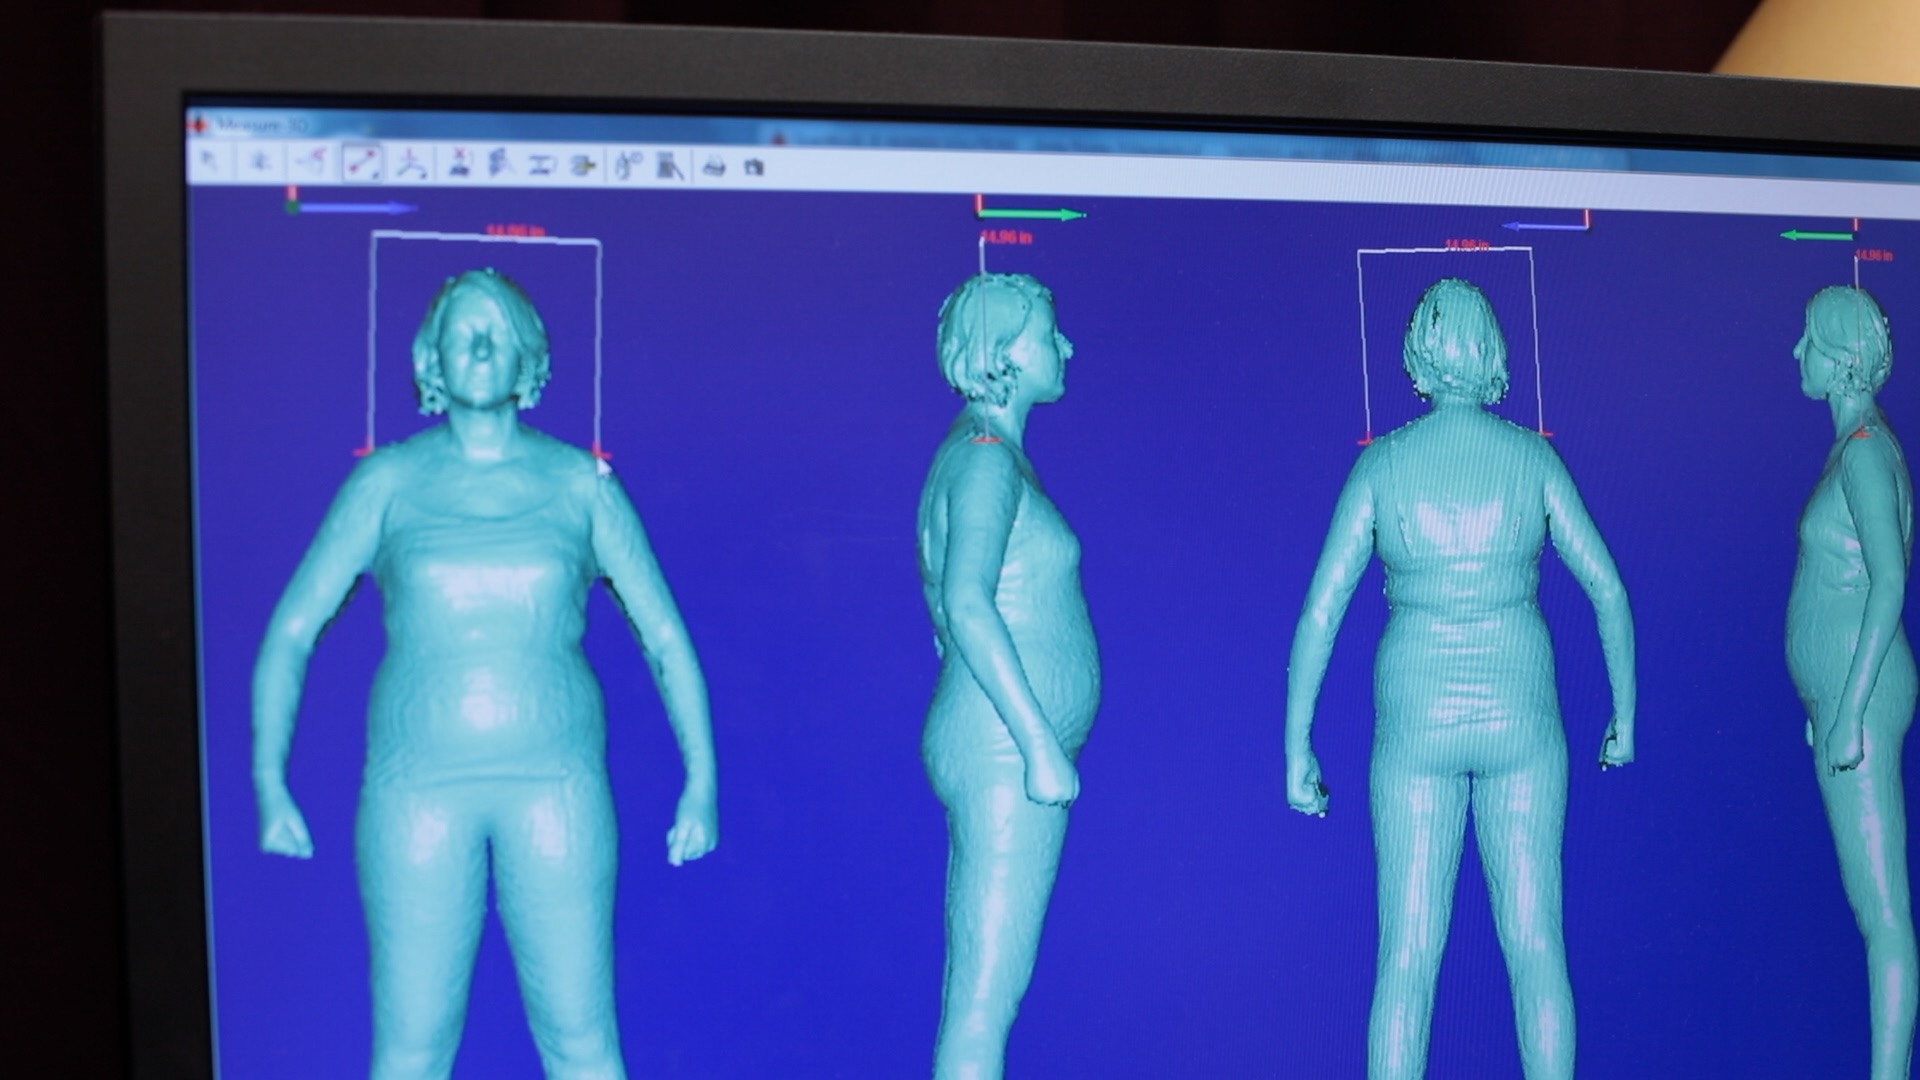 A computer monitor displaying software analyzing images of the human form from several angles